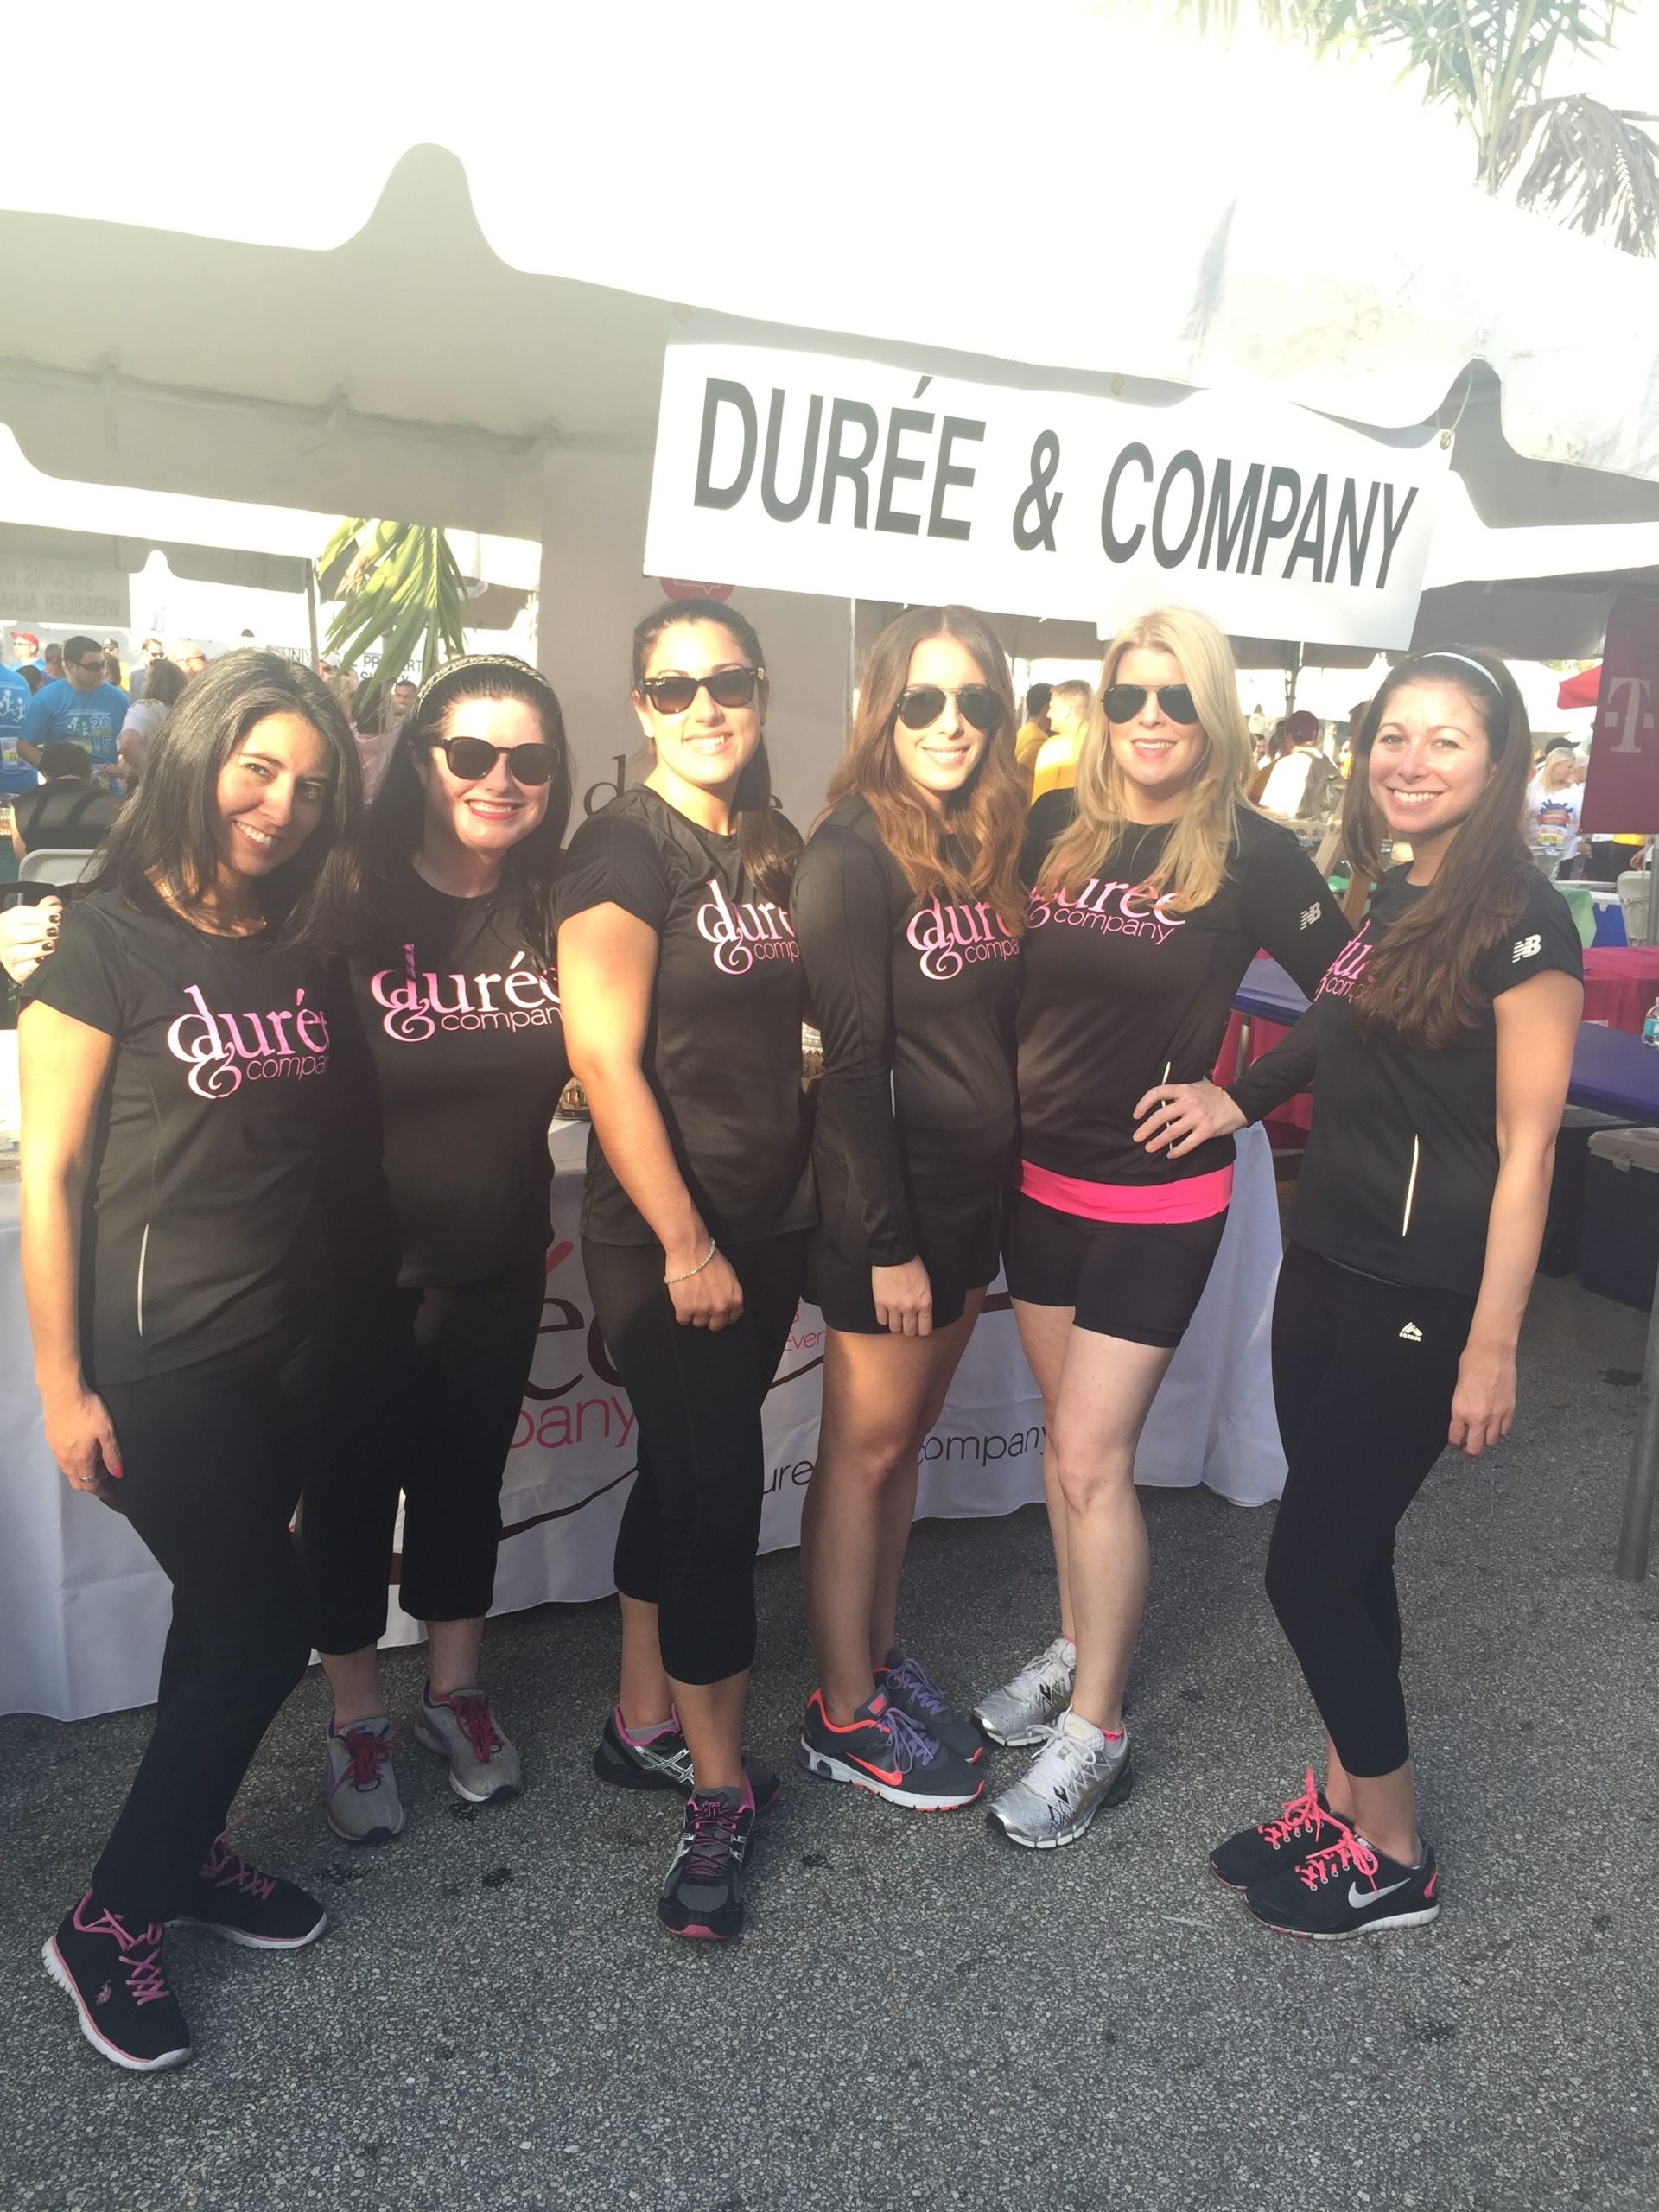 Durée and company corporate run reasons to run 5k